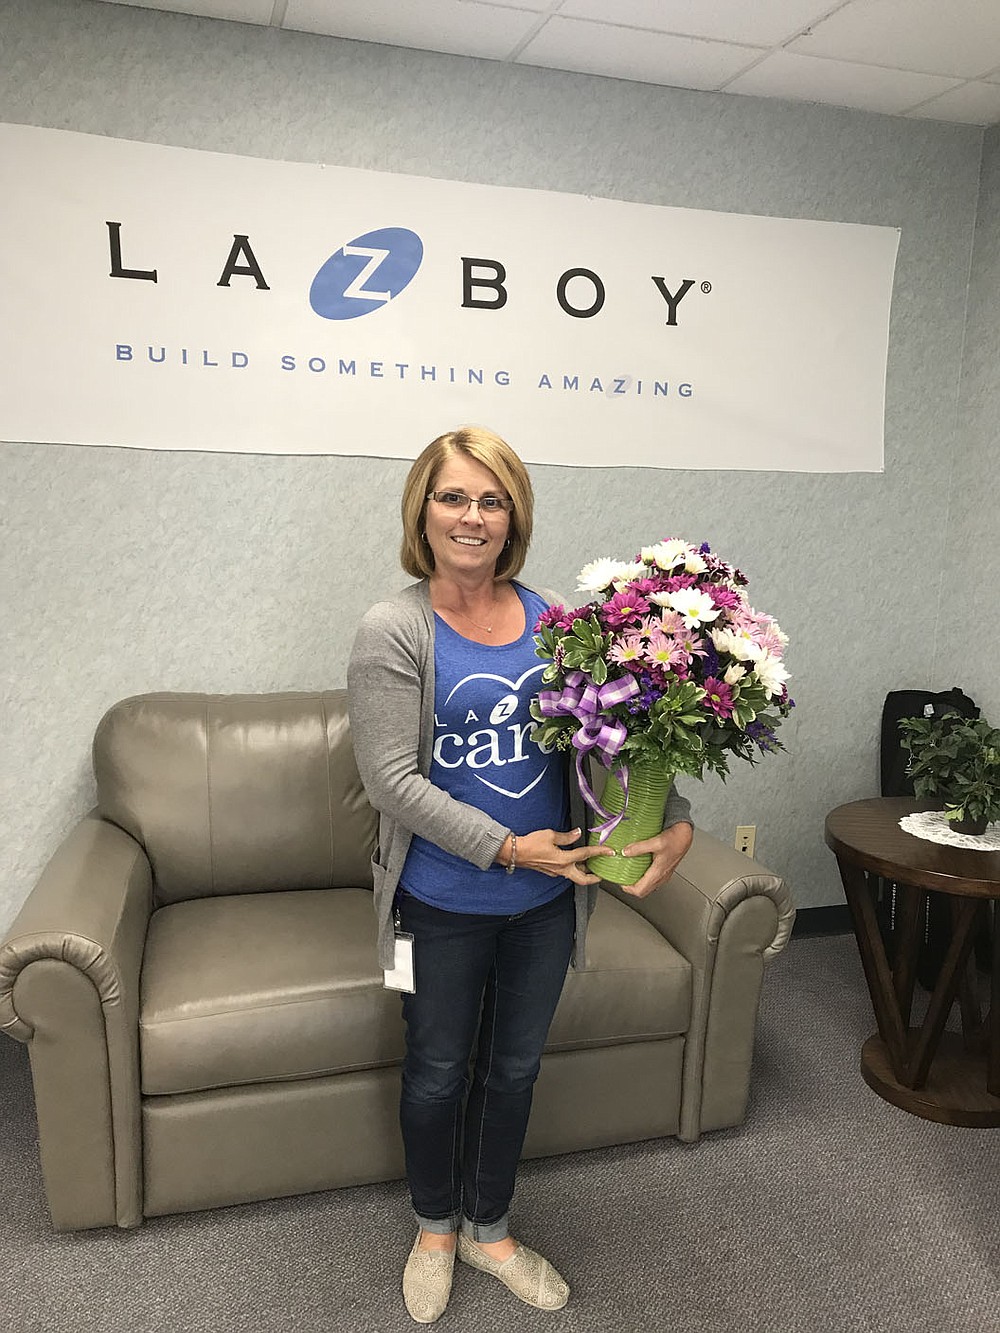 Photo submitted Audra Farrell poses with flowers in front of the La-Z-Boy sign on her last day of work at the furniture magnet. Farrell, who was chosen to receive an award during the Outstanding Civic Leadership Event said she enjoyed her time at La-Z-Boy and will miss the friendships she has developed there.